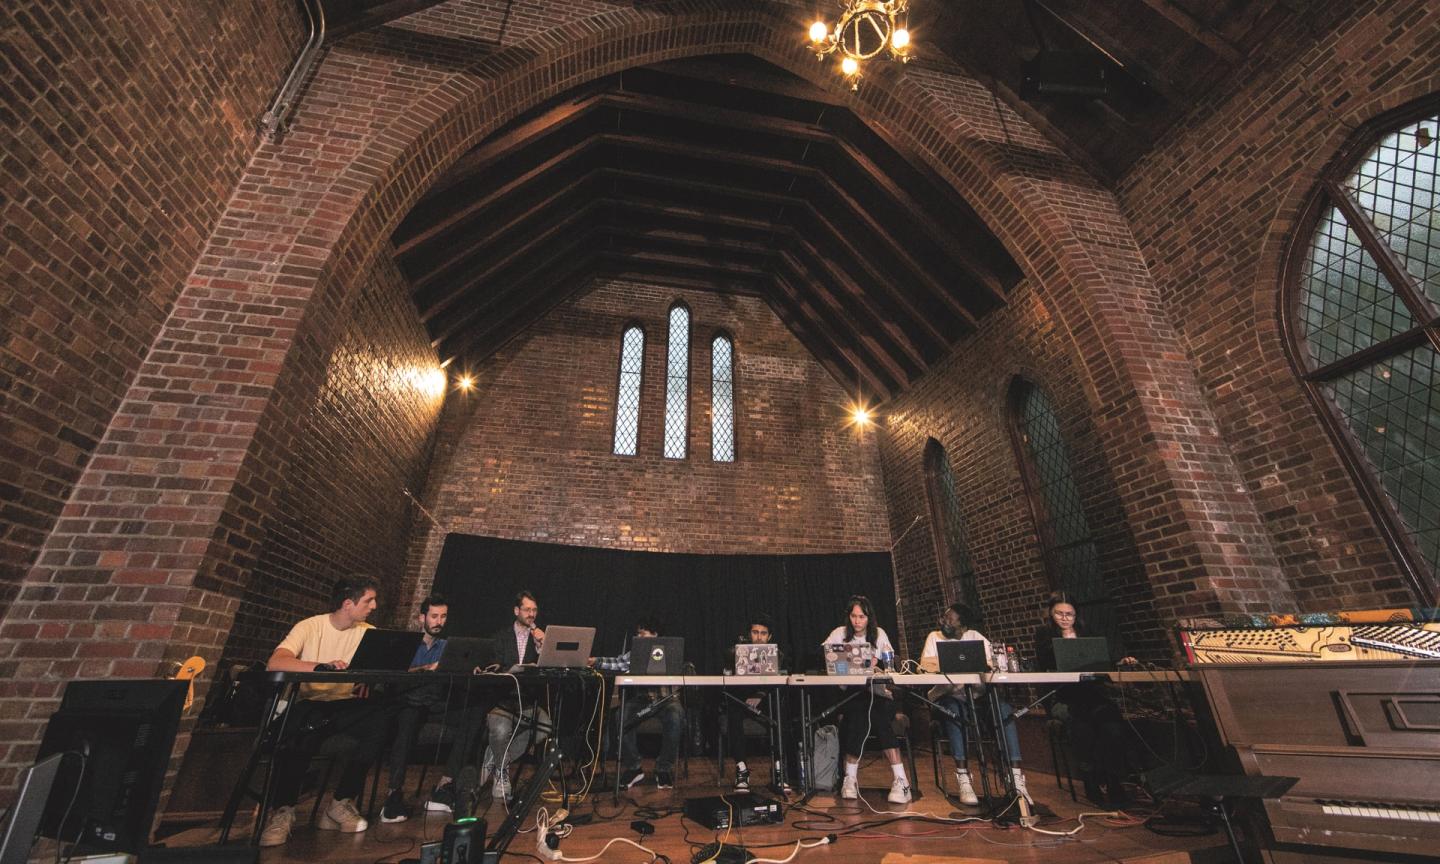 The Duke Laptop Ensemble’s debut concert filled The Northstar Church brick hall with sound.